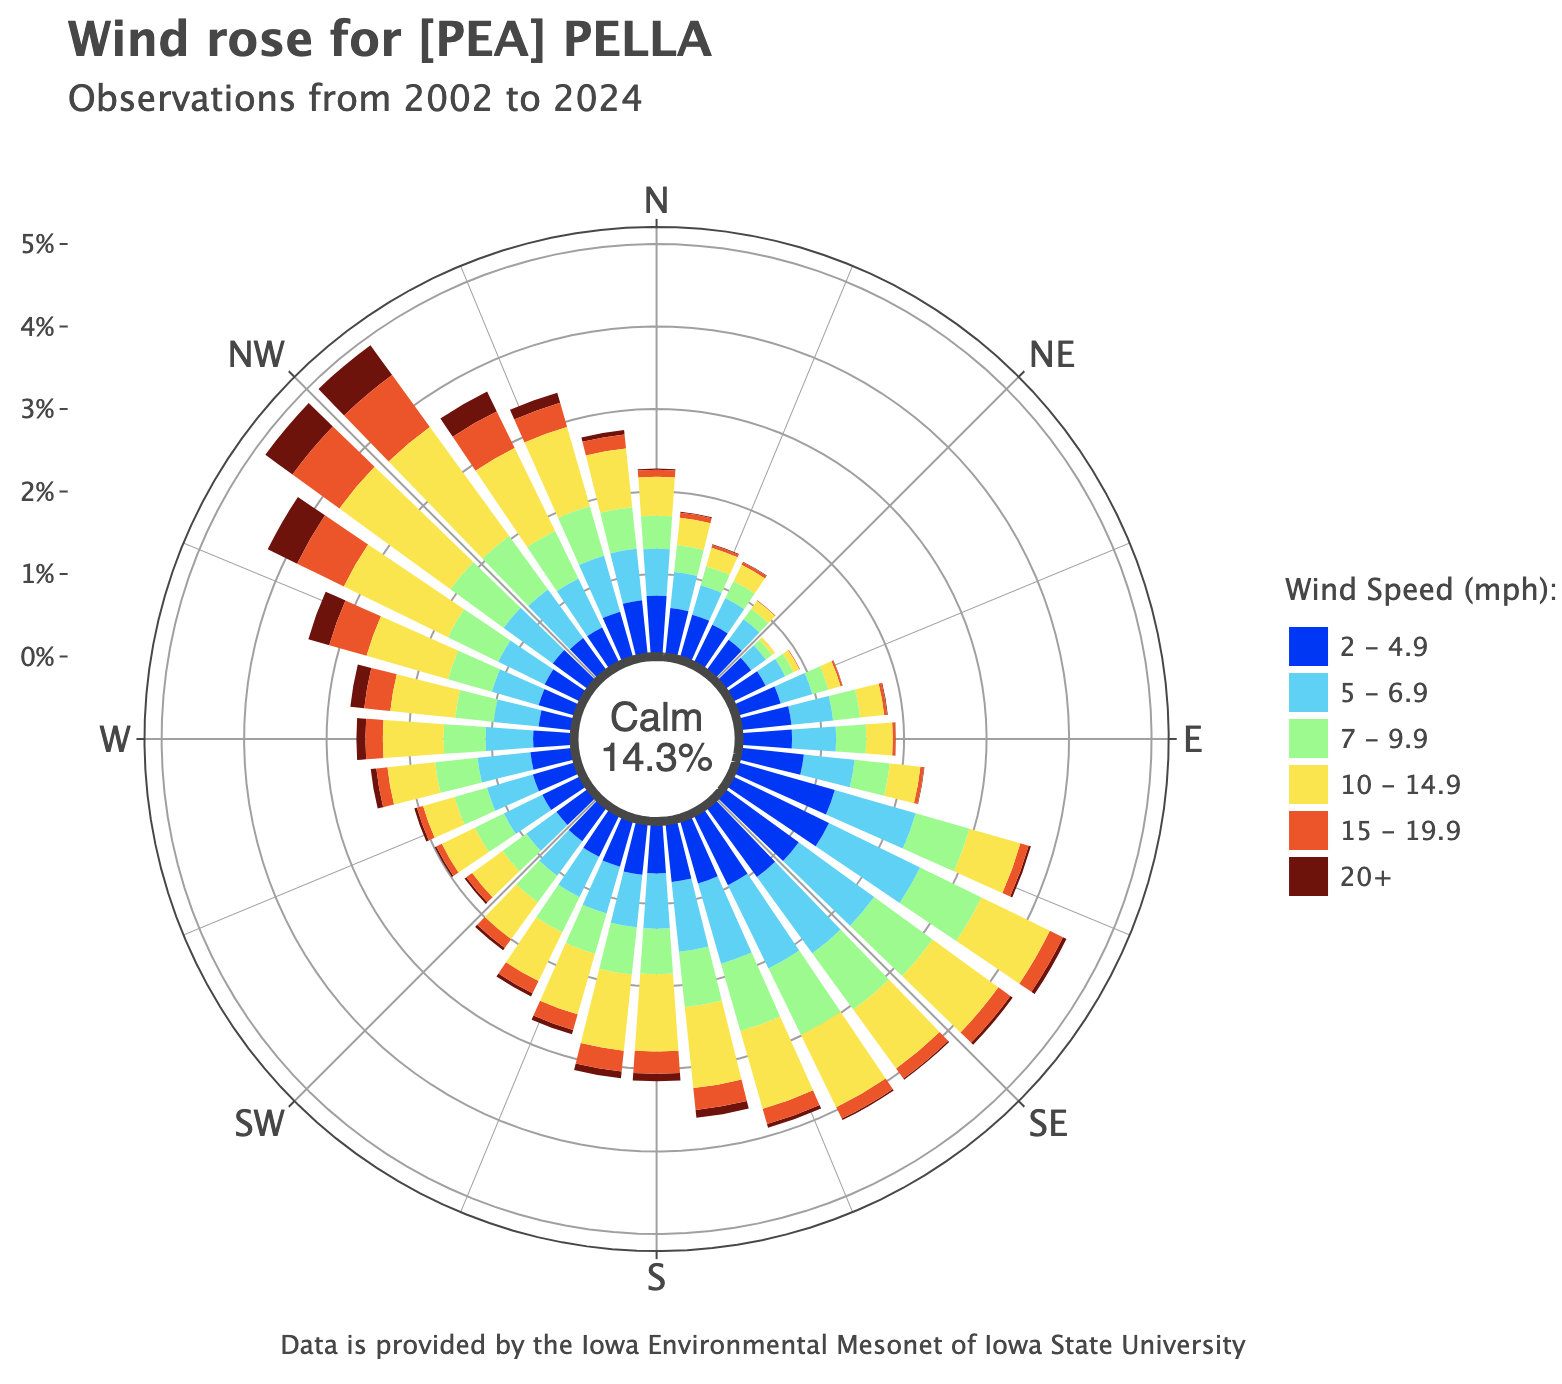 f-24a/images/gal_wind_rose.png